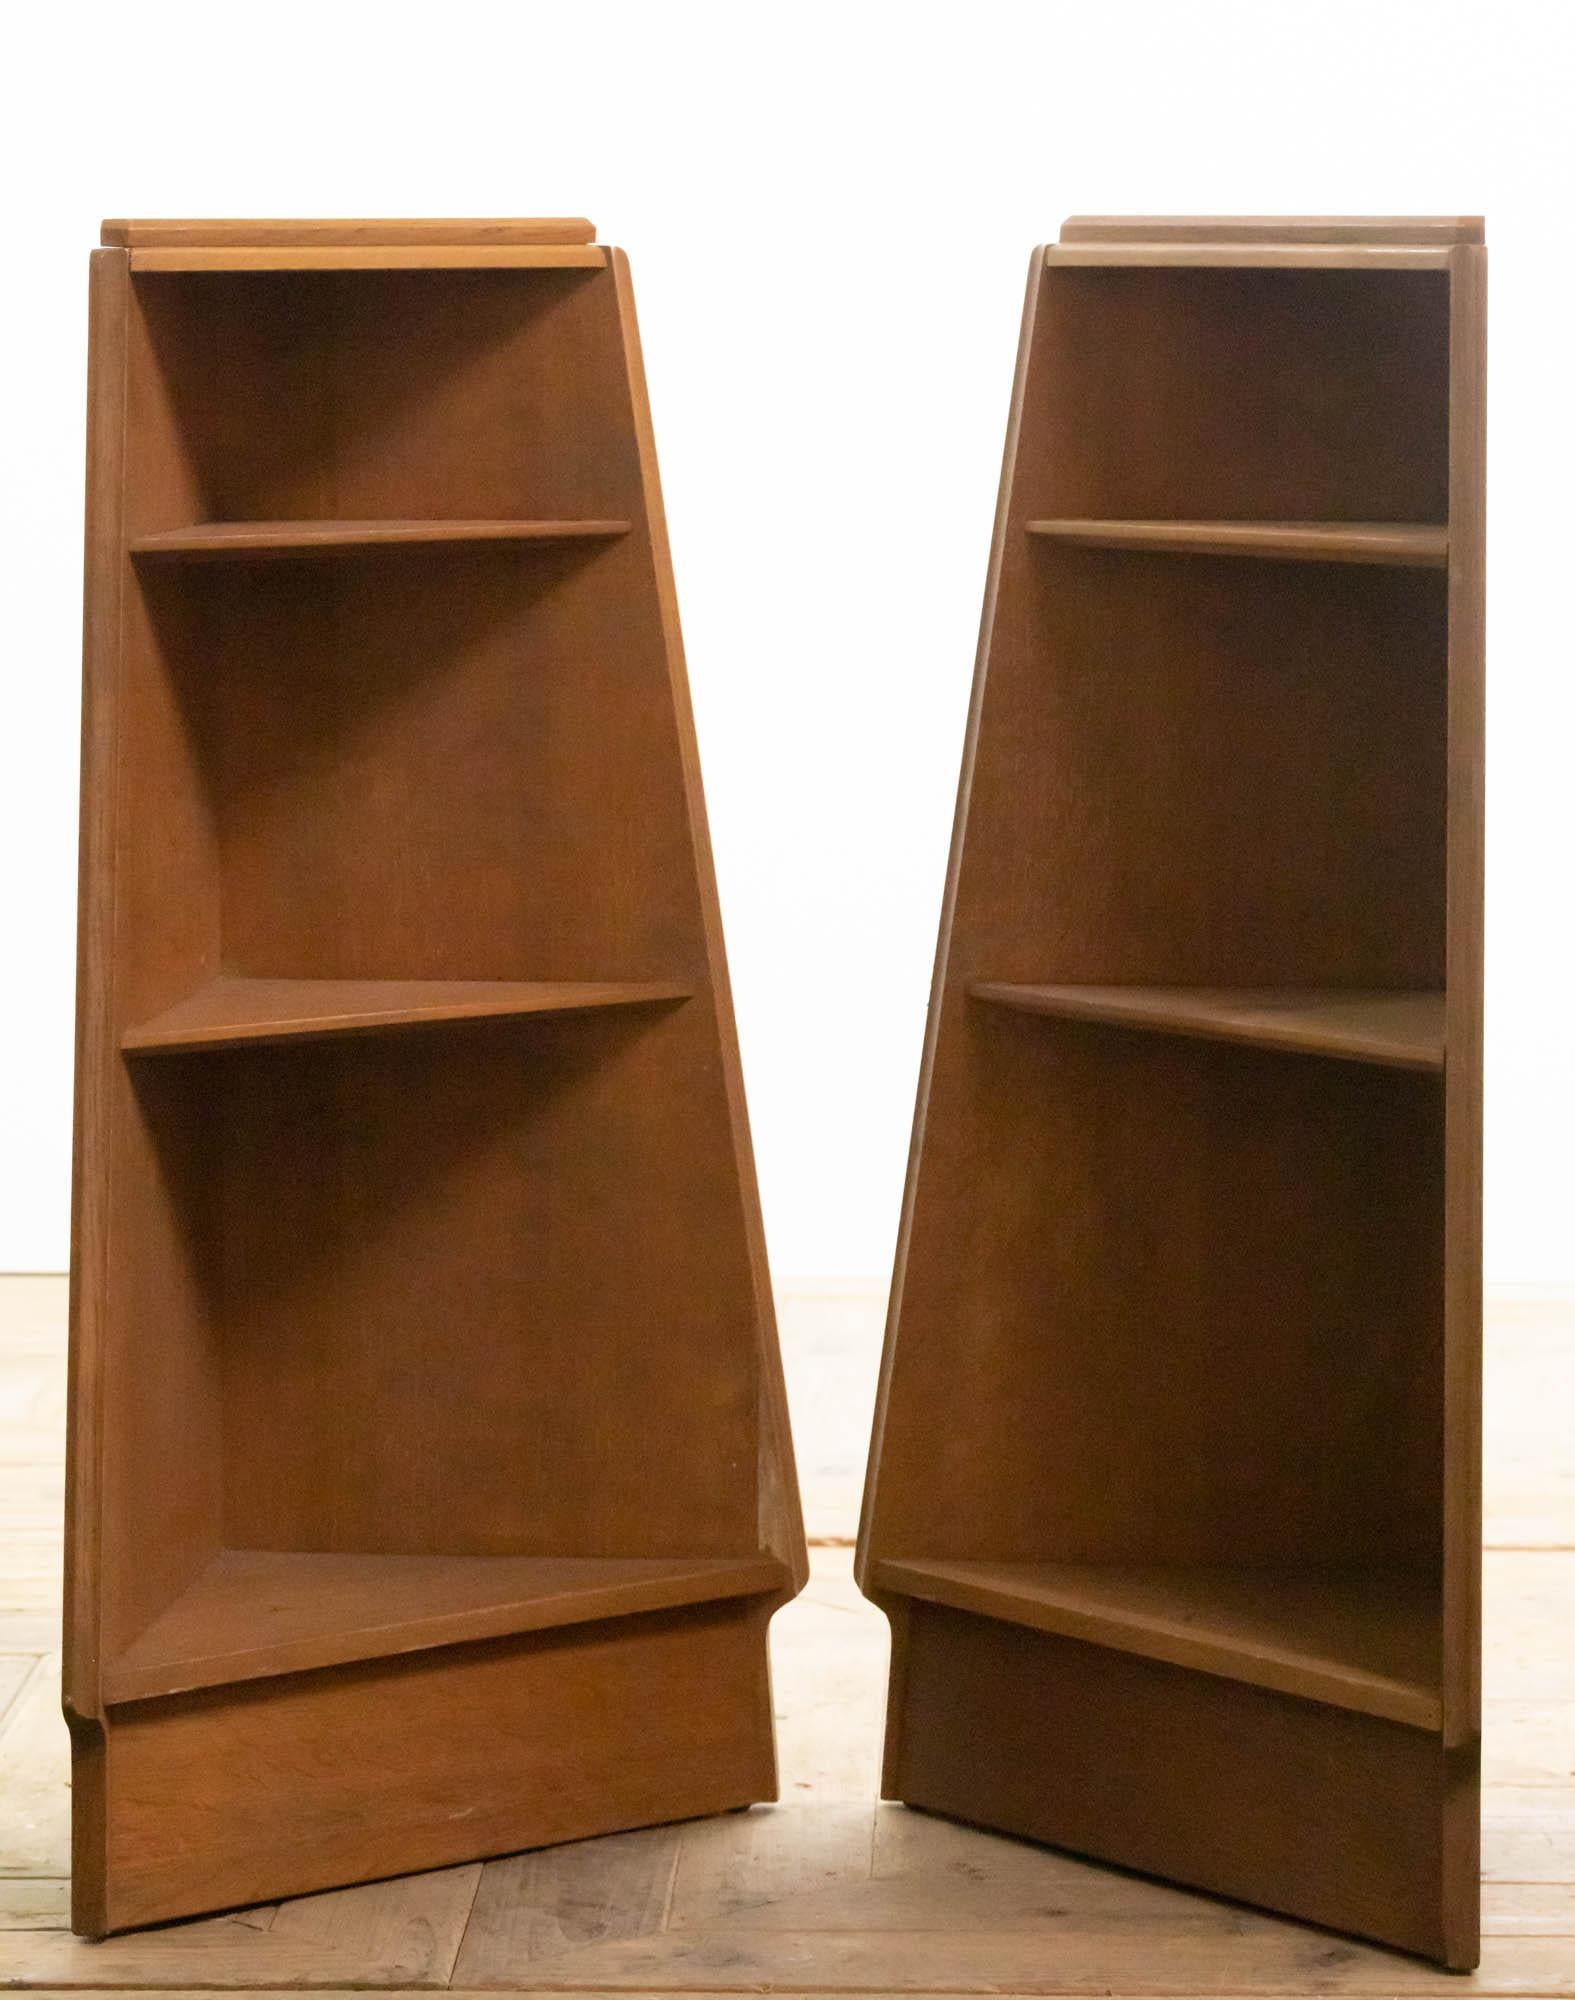 A stunning pair of midcentury limed oak book cases or cabinets in the style of Heals. The tapered triangular design holds three fixed graduated shelves.